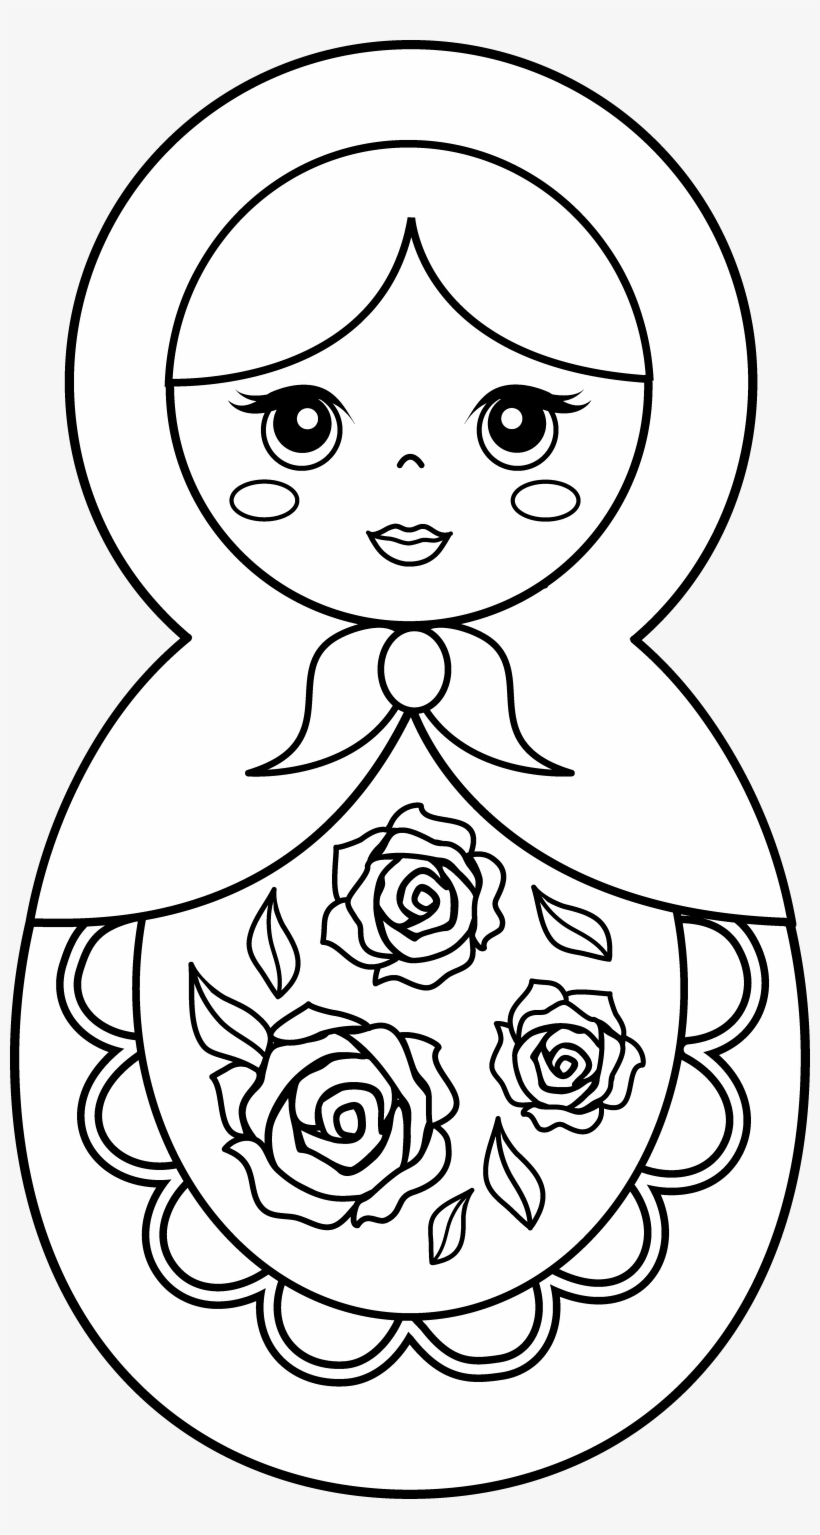 Clip Download Flute Clipart Colouring Page - Russian Doll Coloring Page, transparent png #2693831